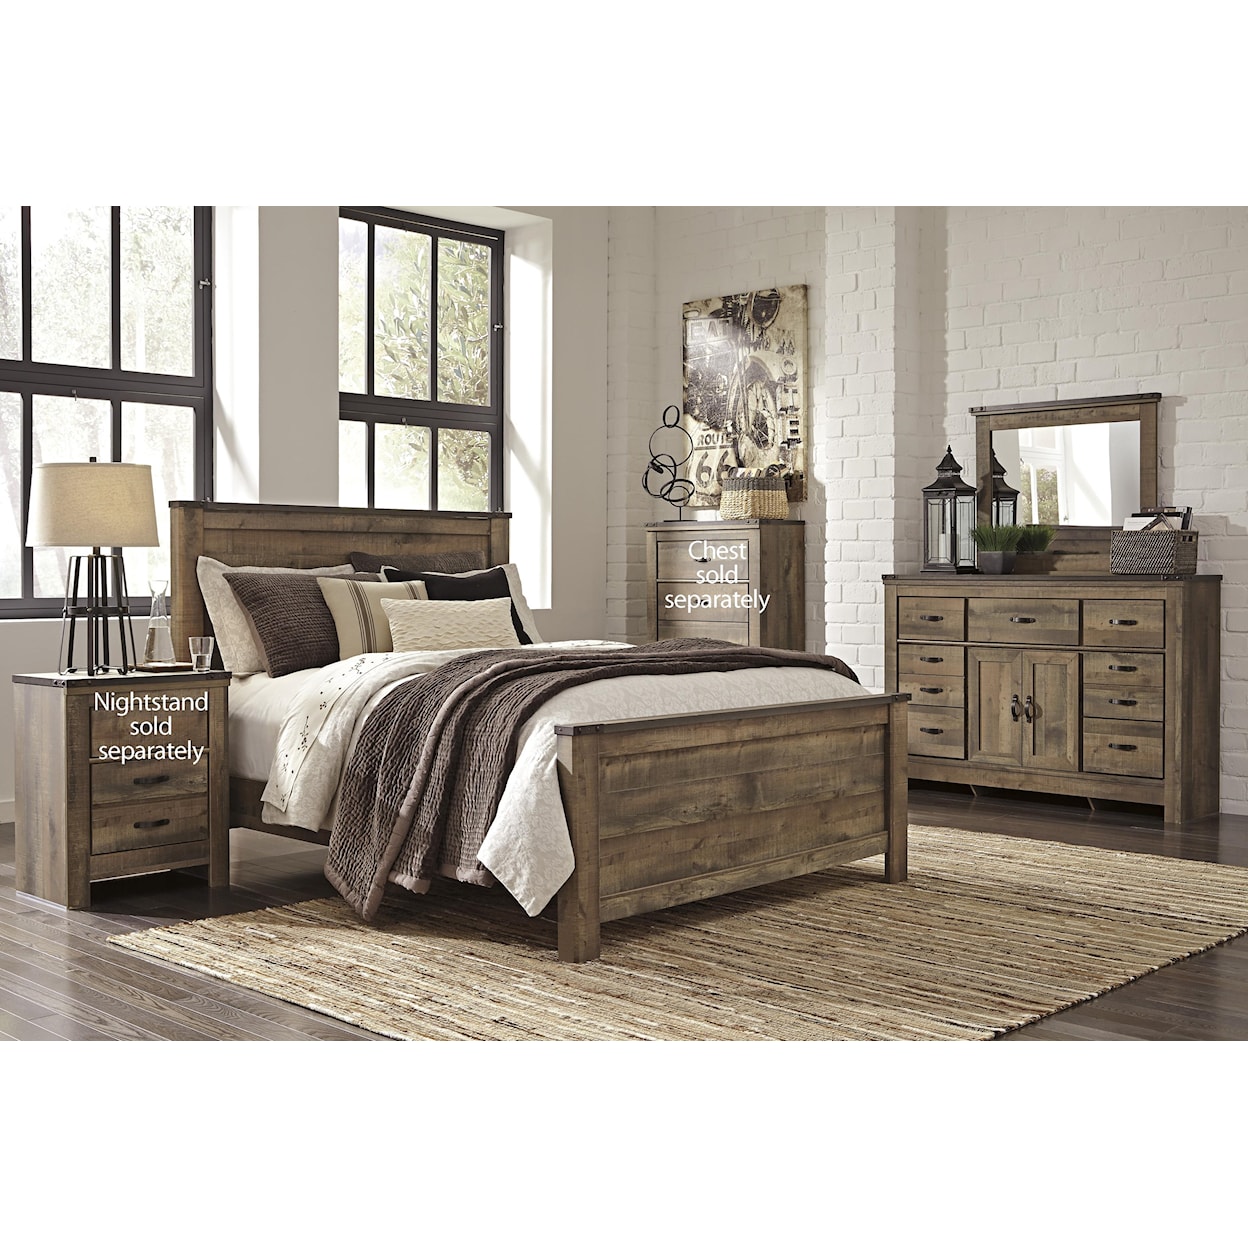 Signature Design by Ashley Trinell Queen 5-Piece Bedroom Group